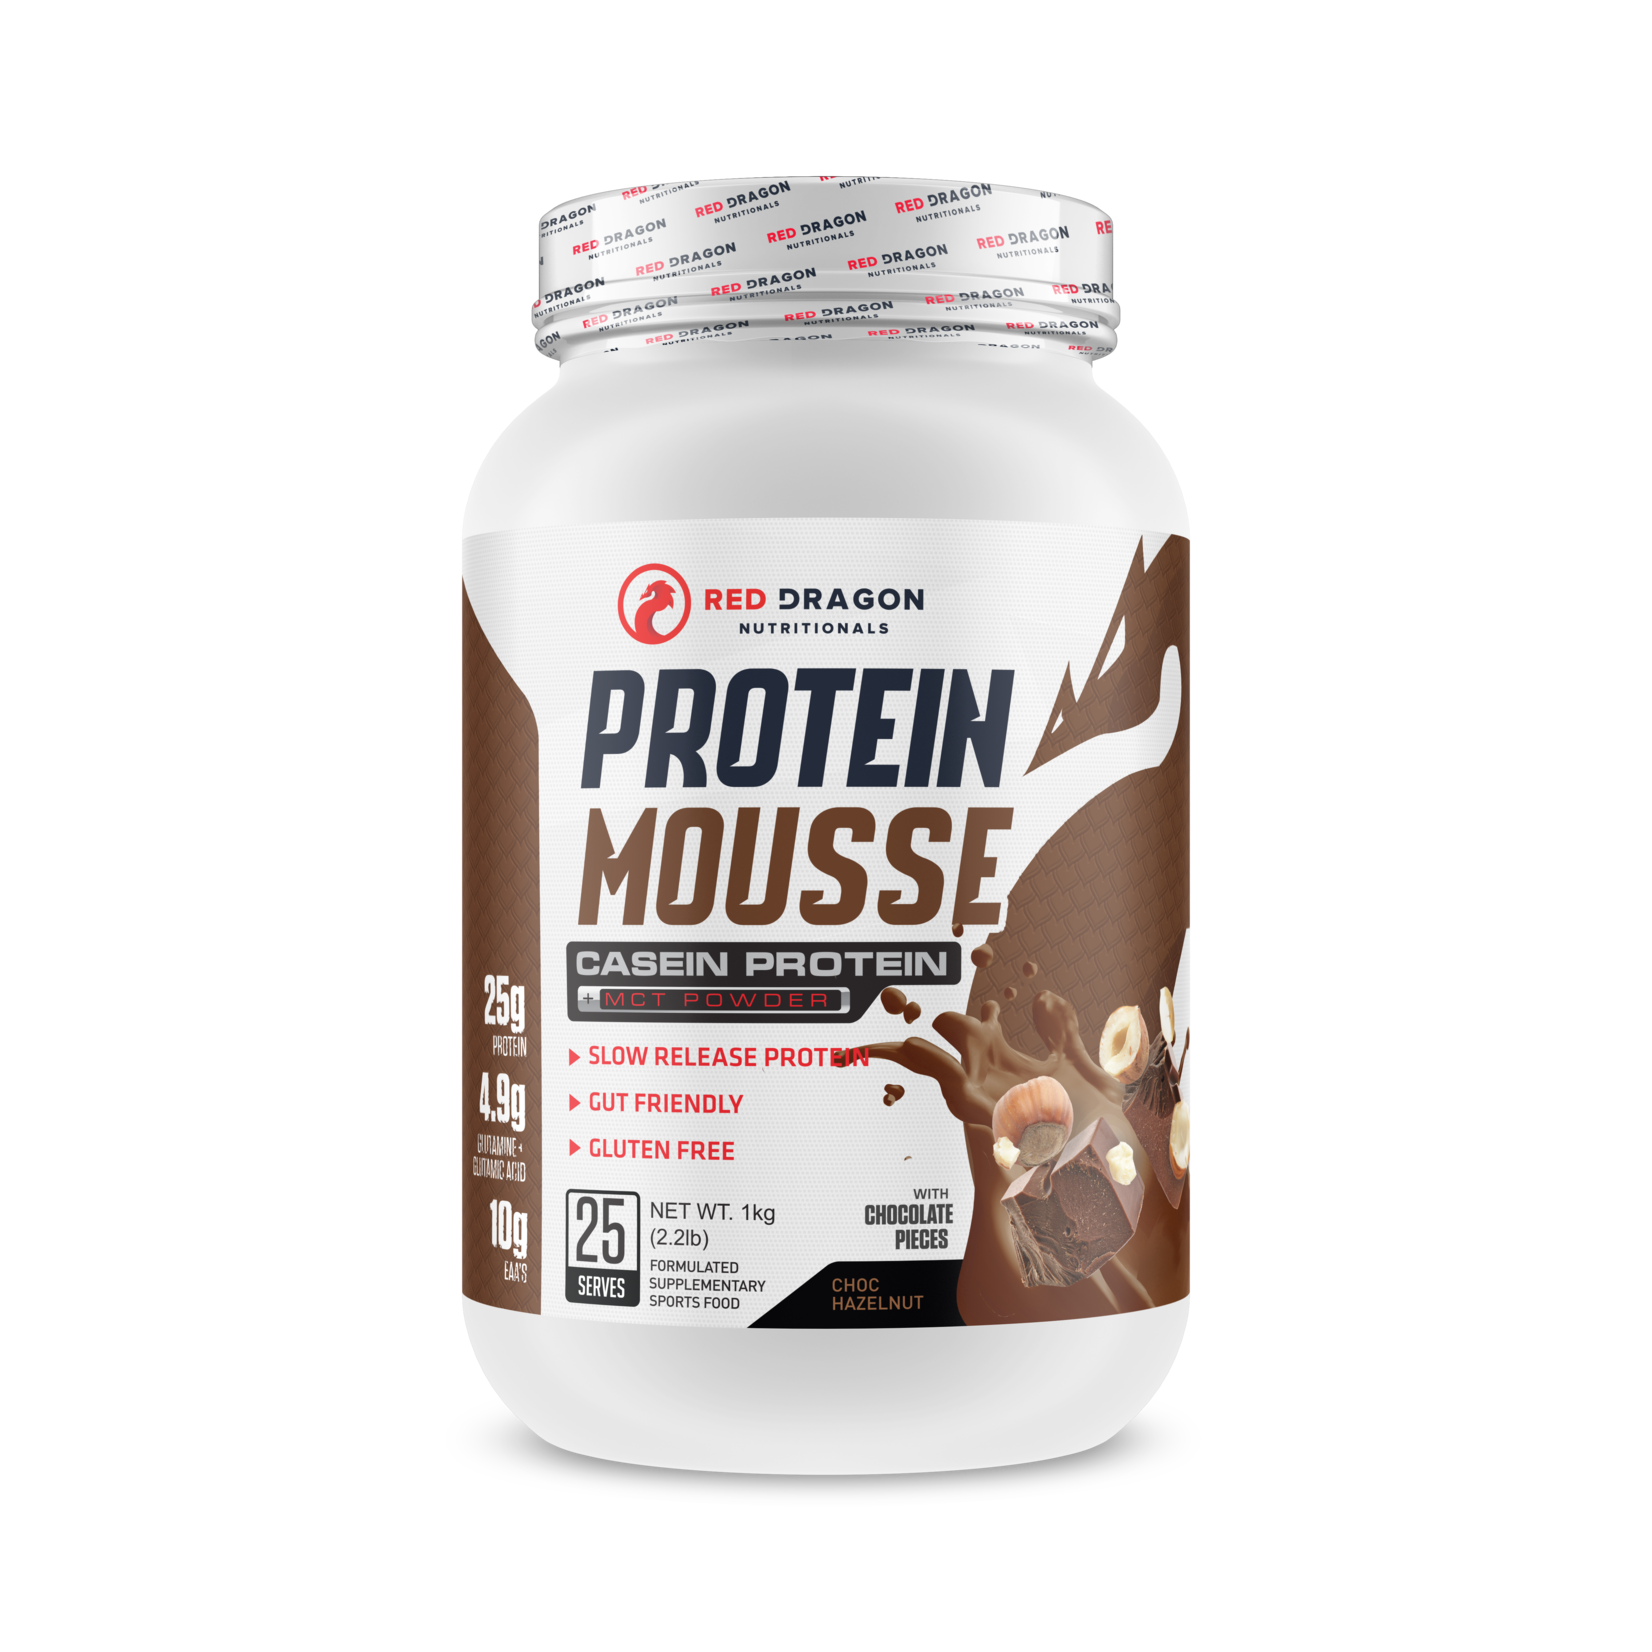 Red Dragon Nutritionals Red Dragon Protein Mousse